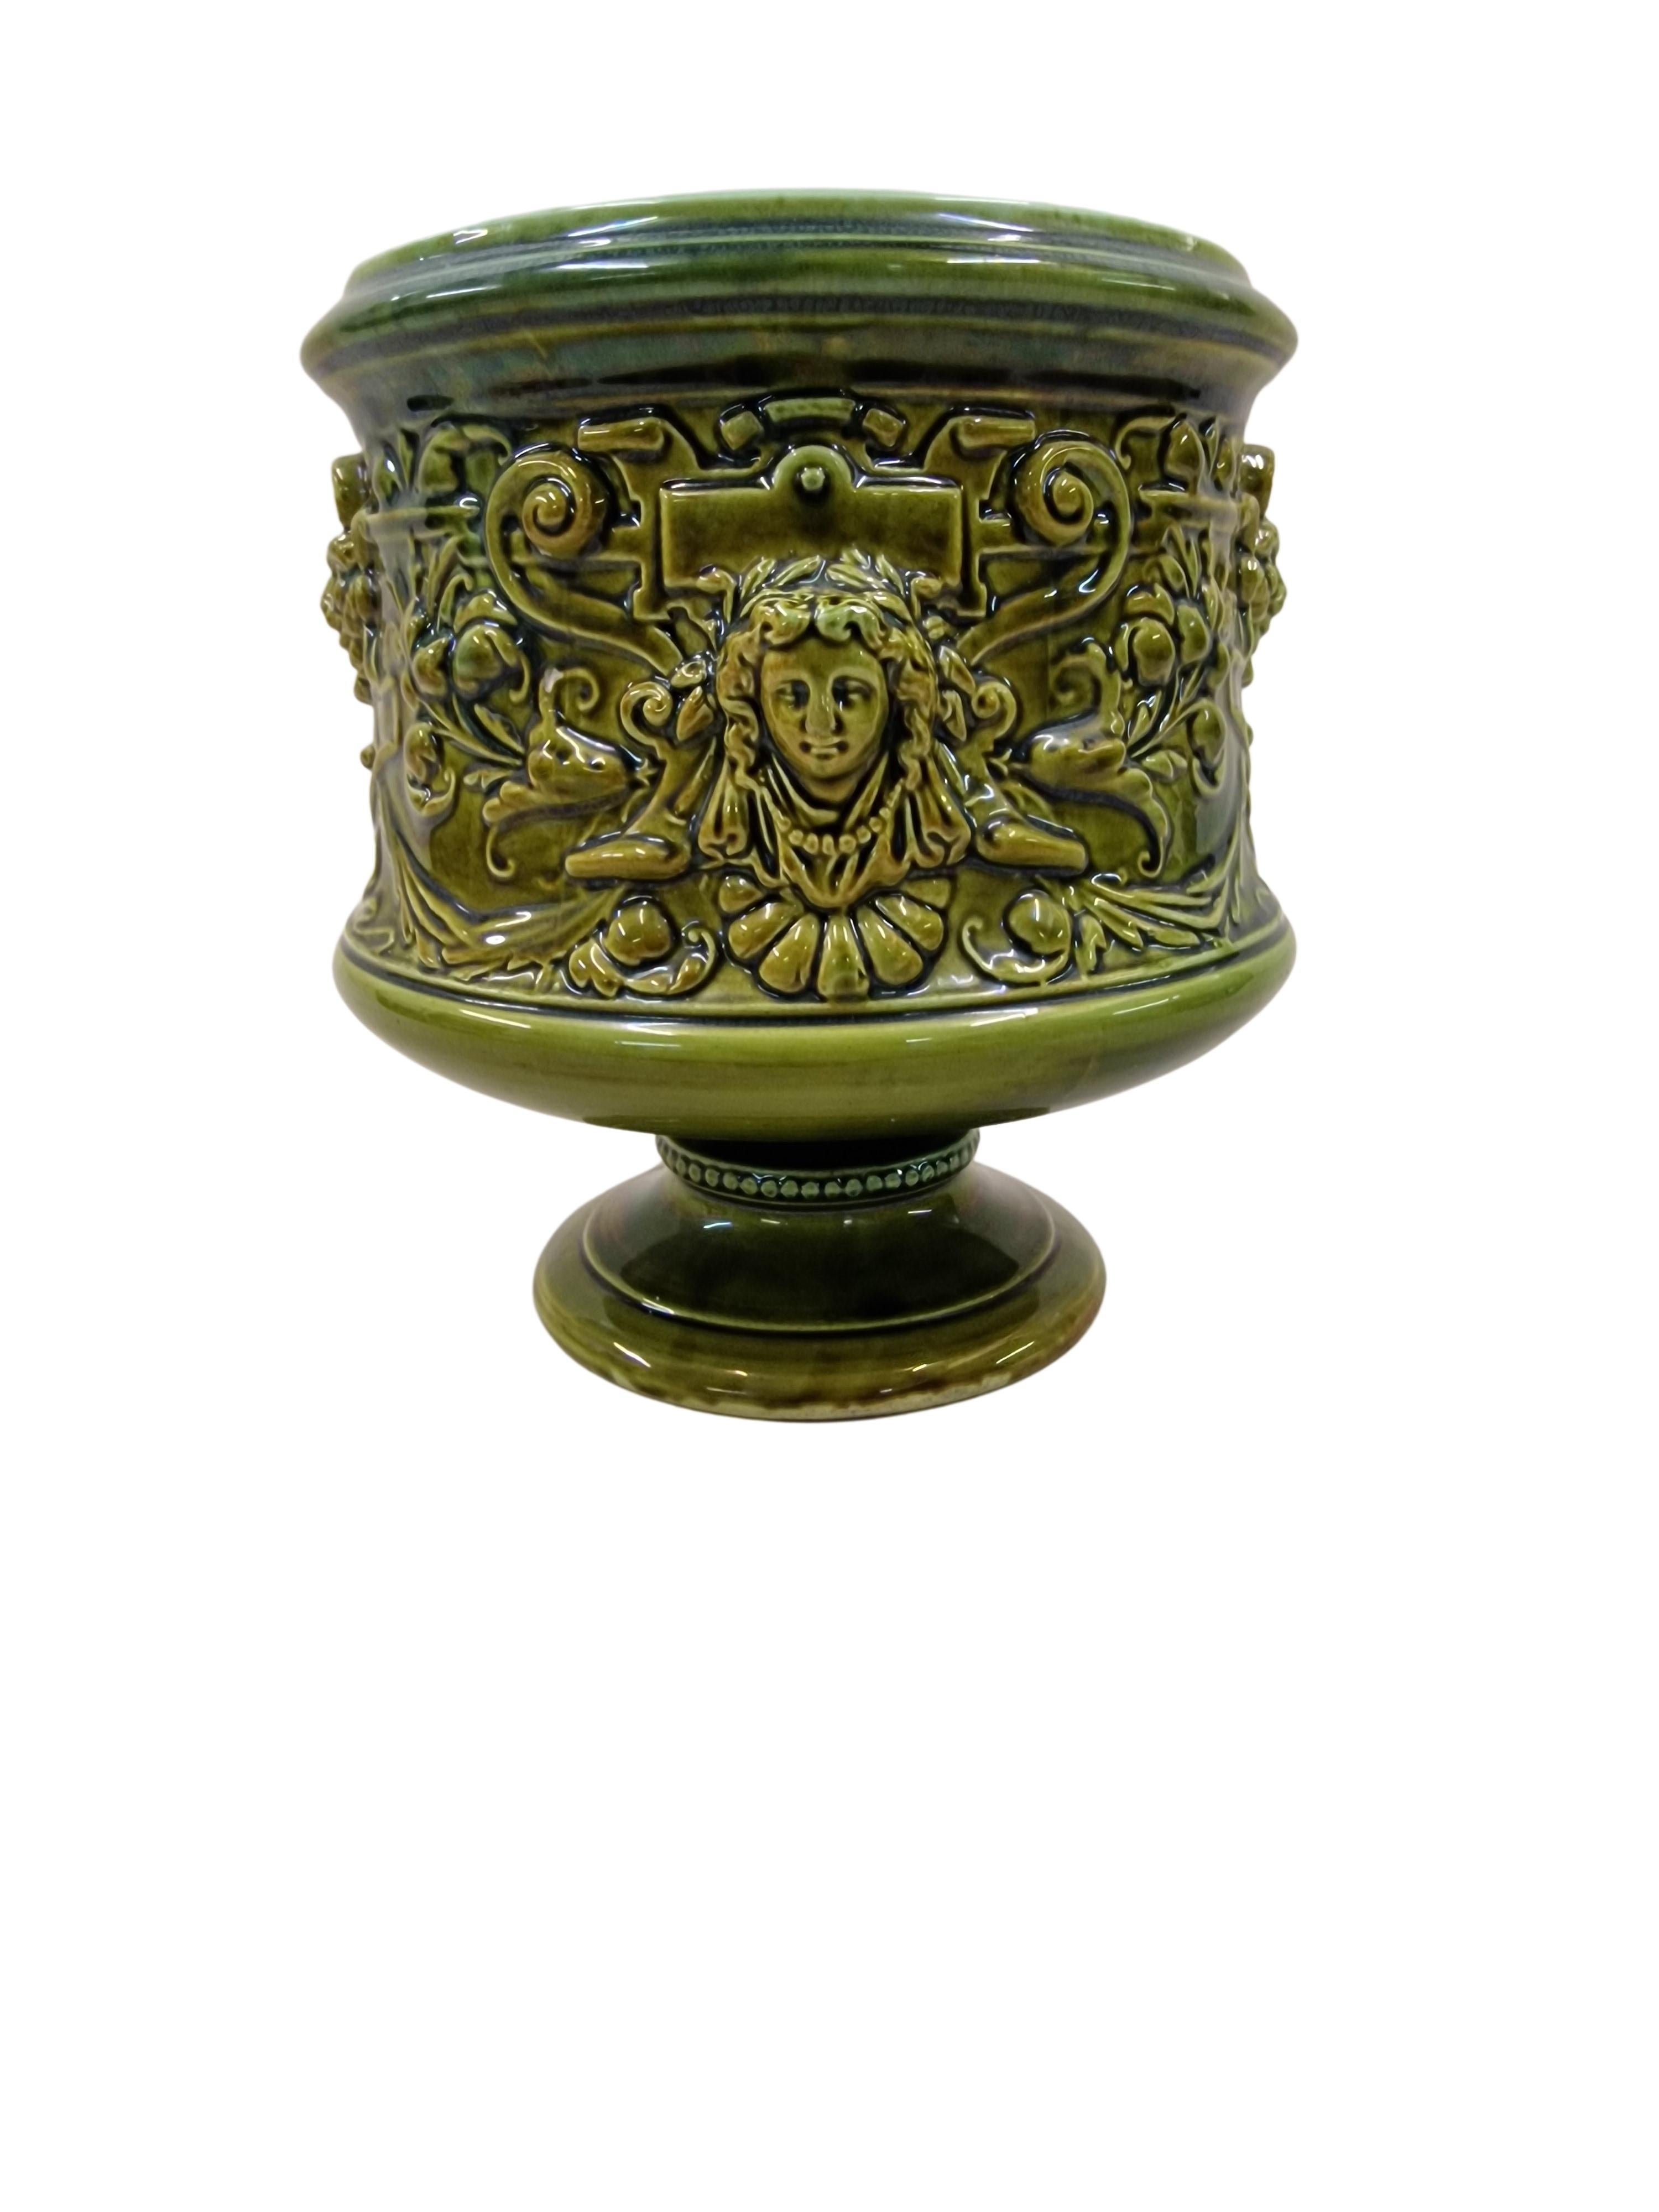 Richly decorated flower pot, from the well-known manufactory Schütz Cilli, which was around 1900 active in today's region of Slovenia. 
This wonderful handmade ceramic work is of a special color - moss green. The glaze is beautifully smooth and